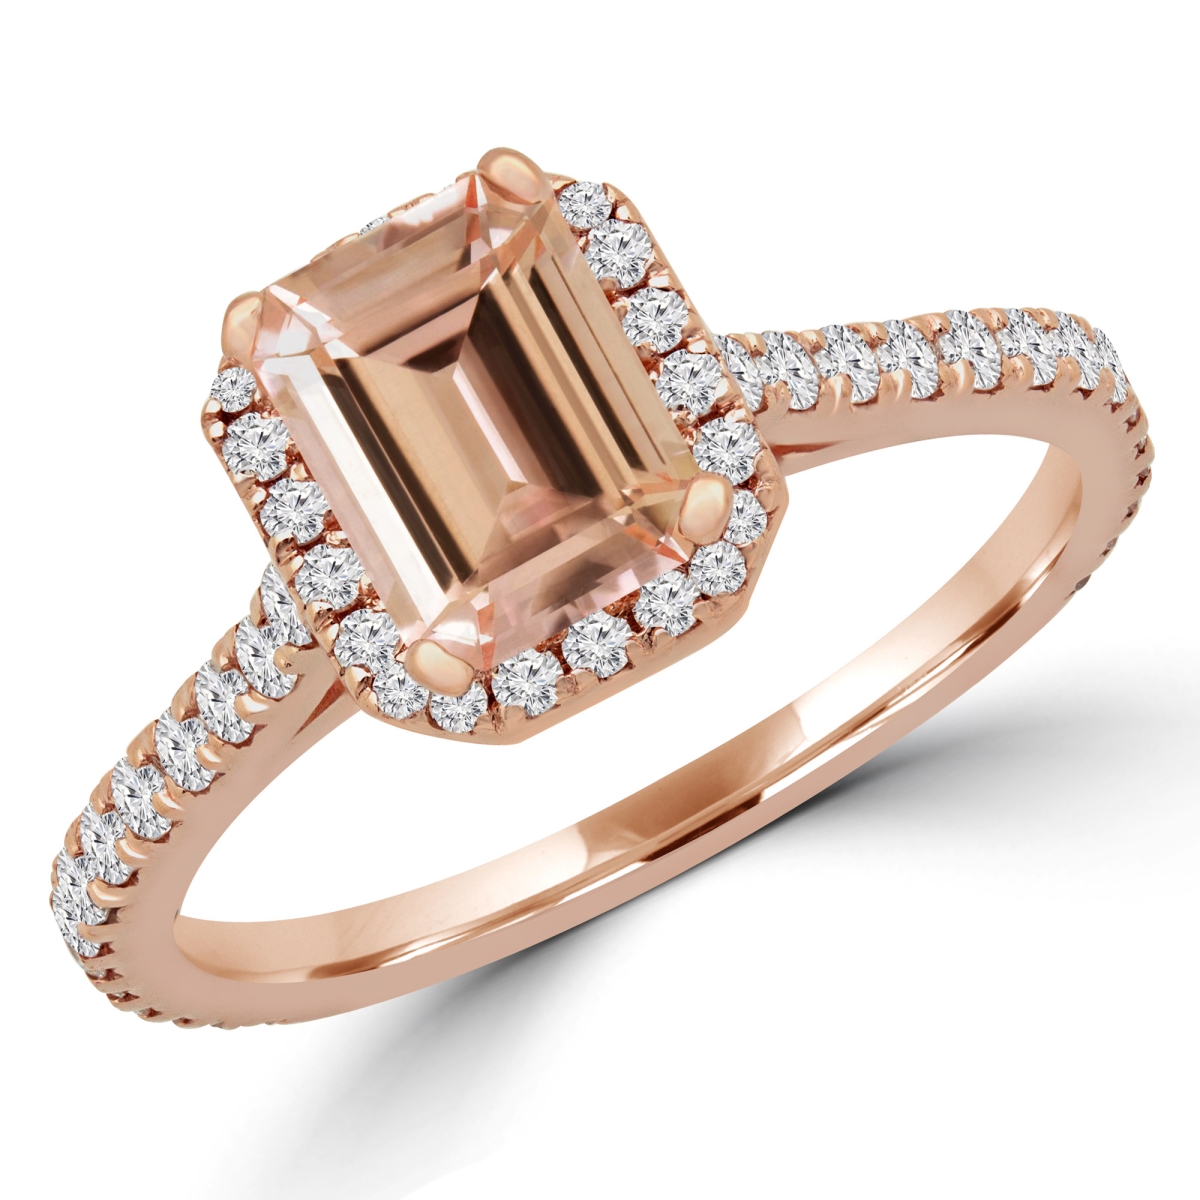 Picture of Majesty Diamonds MD180580-5.5 1.25 CTW Emerald Pink Morganite Halo Engagement Ring in 14K Rose Gold - Size 5.5